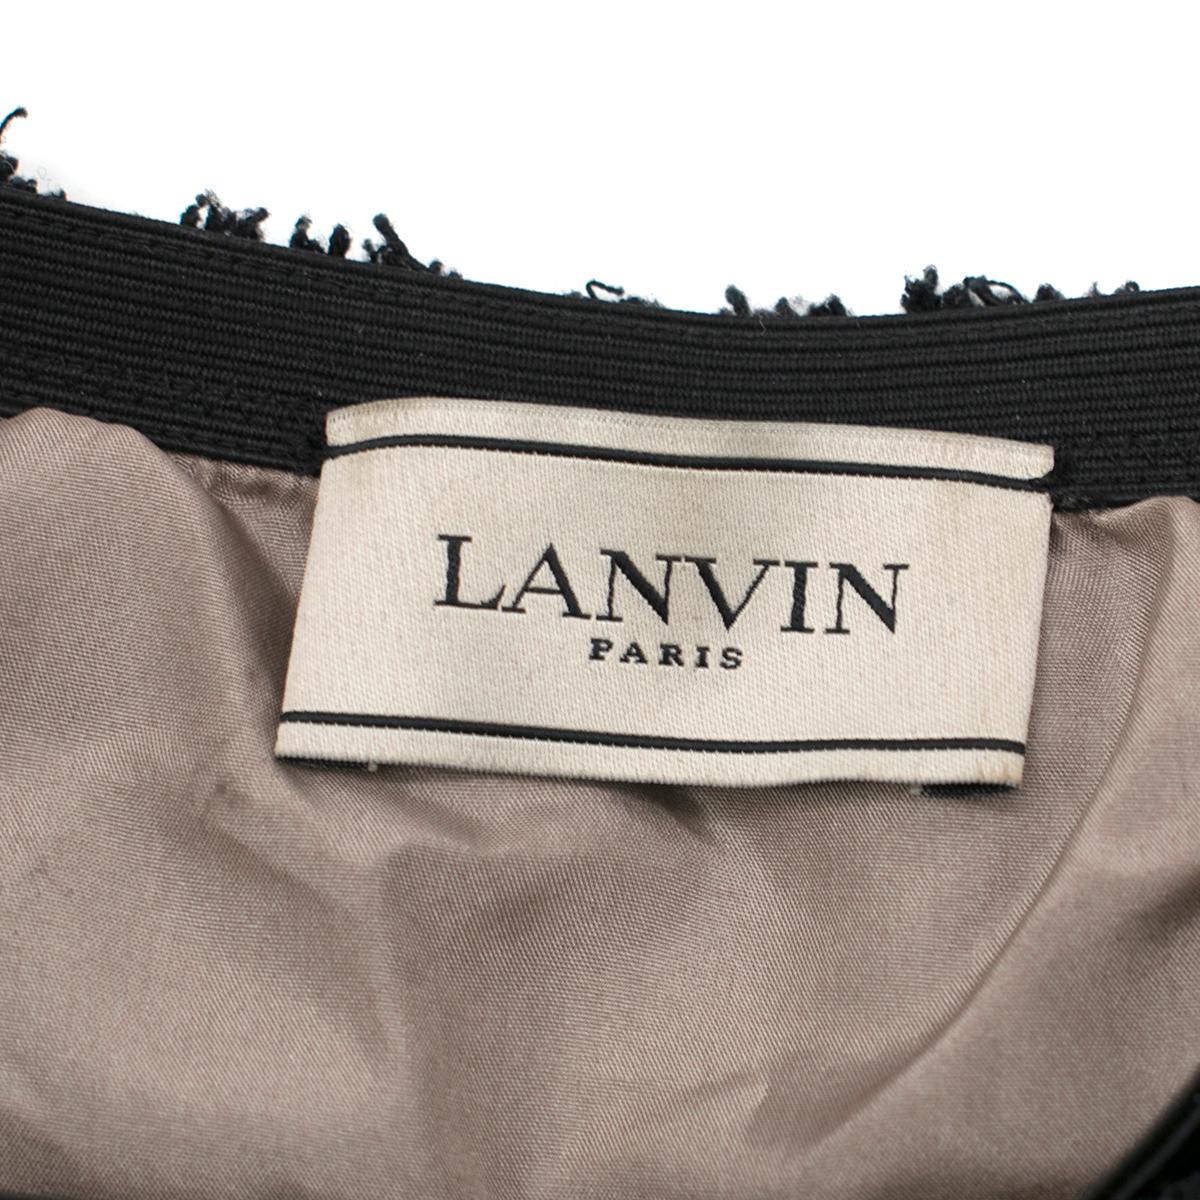 Lanvin Black Silk Lace Embellished Sleeveless Top - Size US 6 For Sale 1